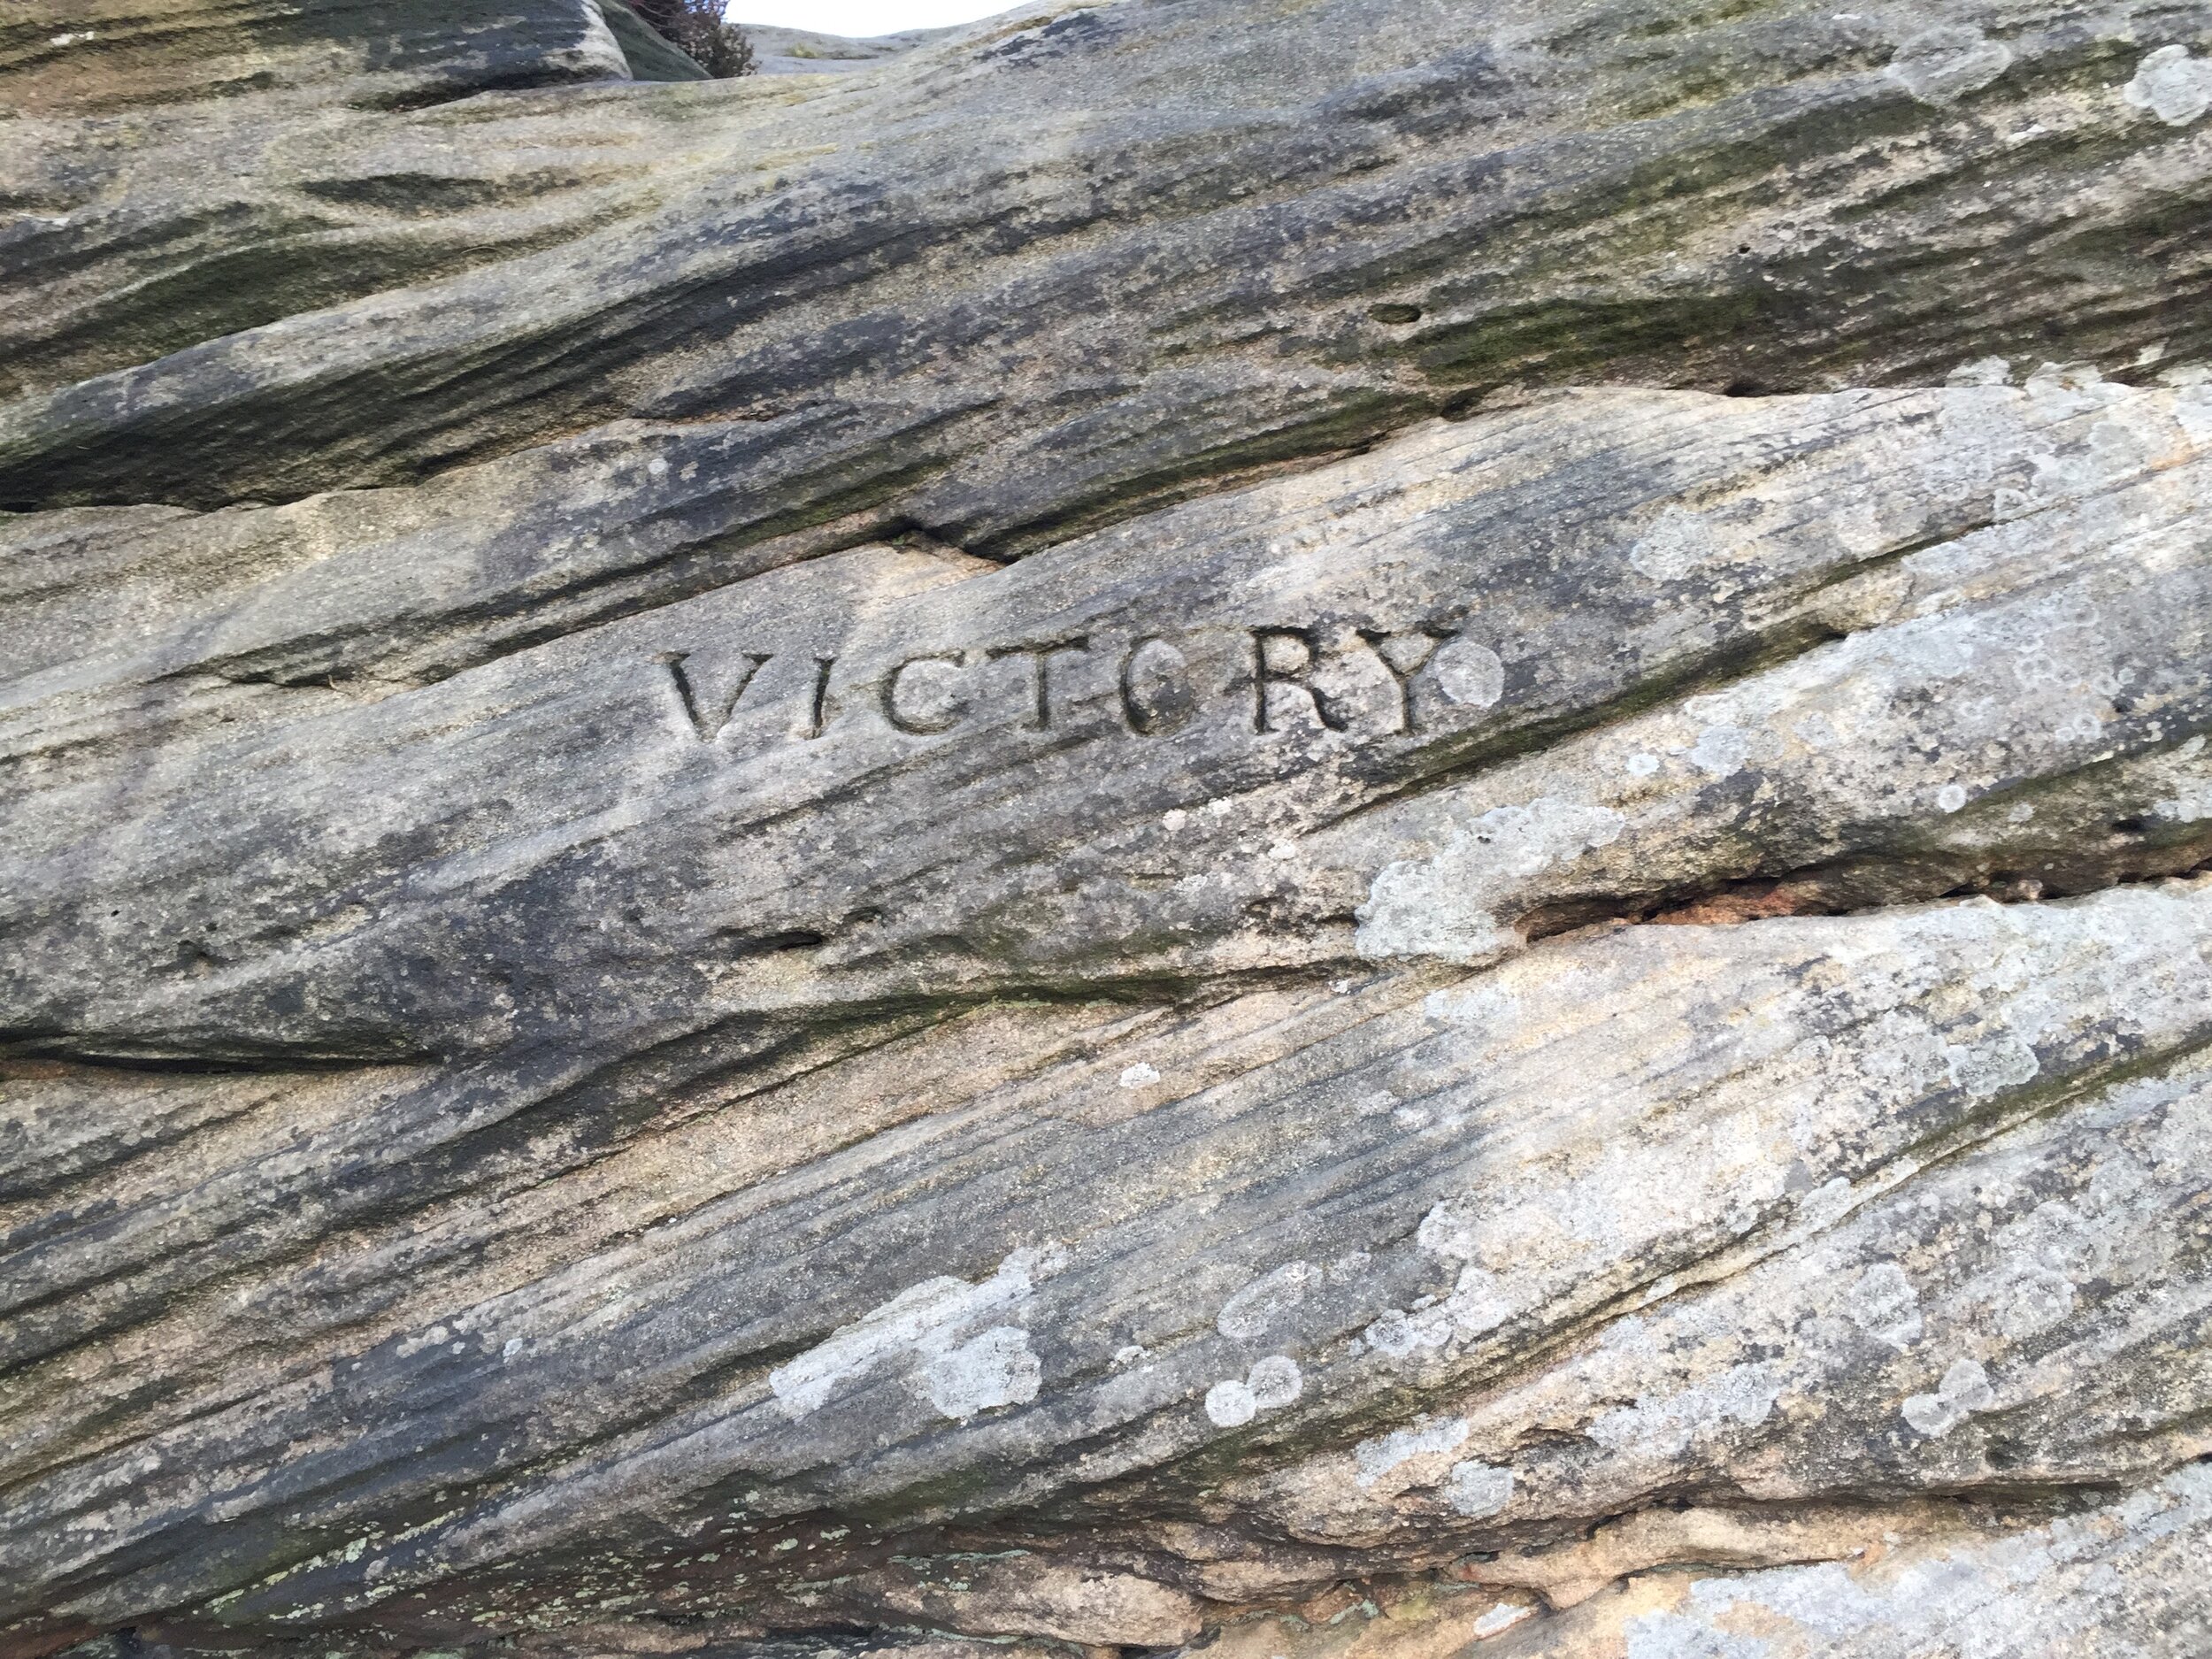  A close-up of the inscription ‘VICTORY’. 